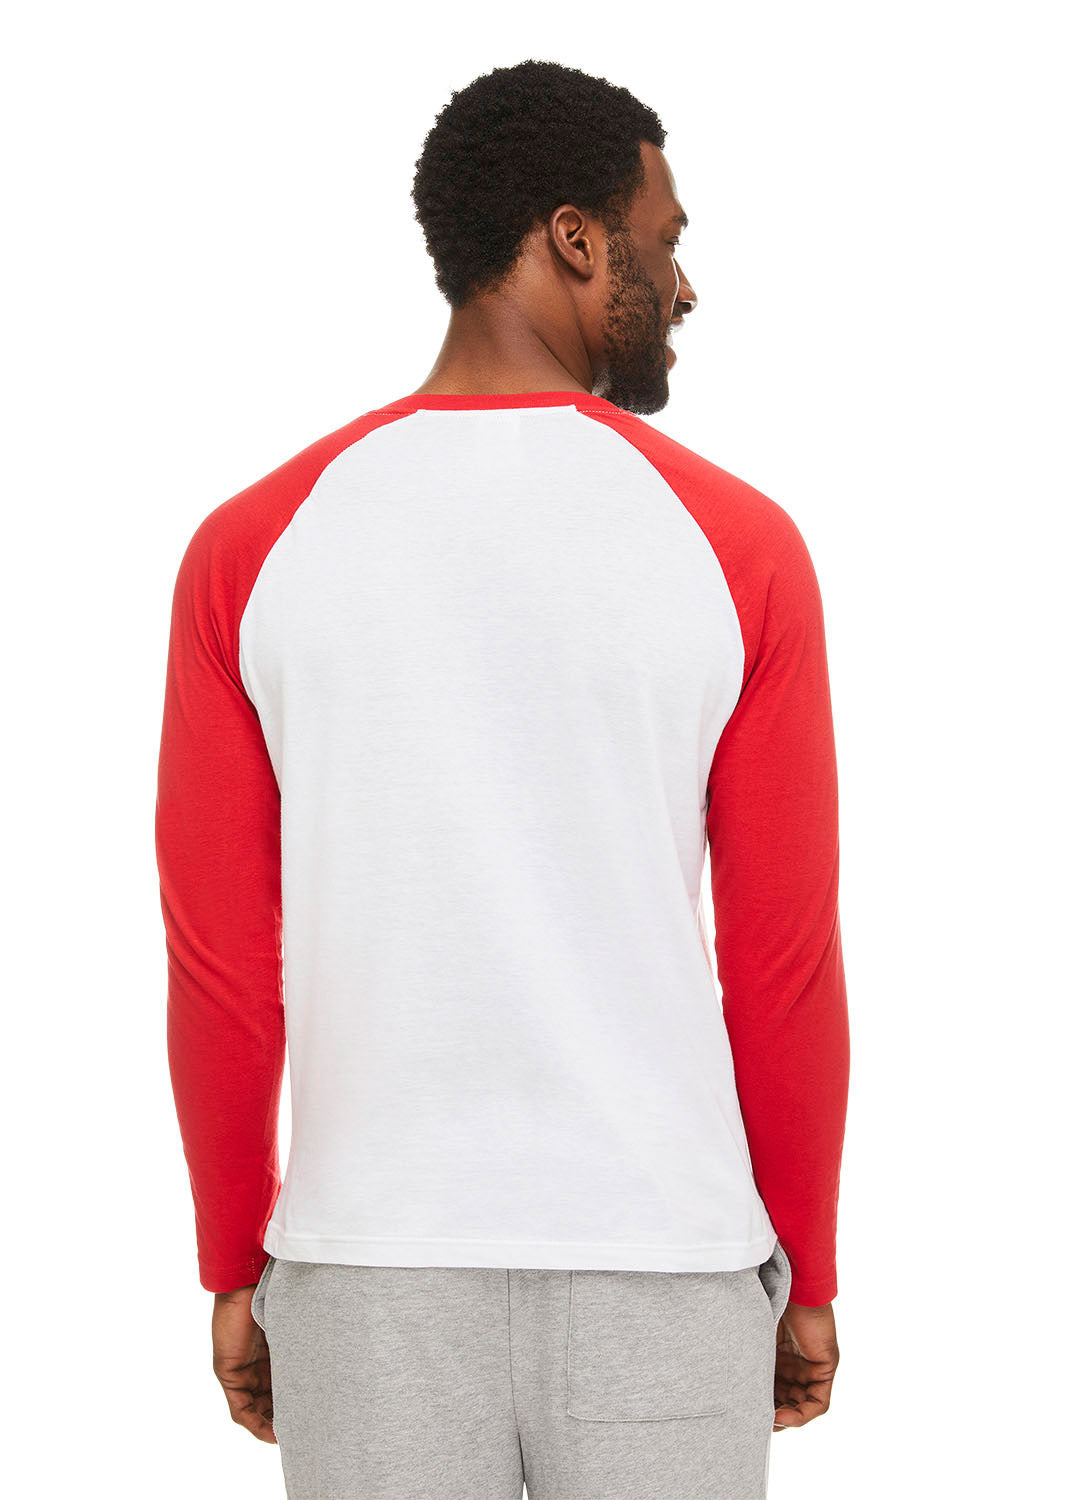 Back view Men wearing Canadiens Sleep Shirt (white and red)